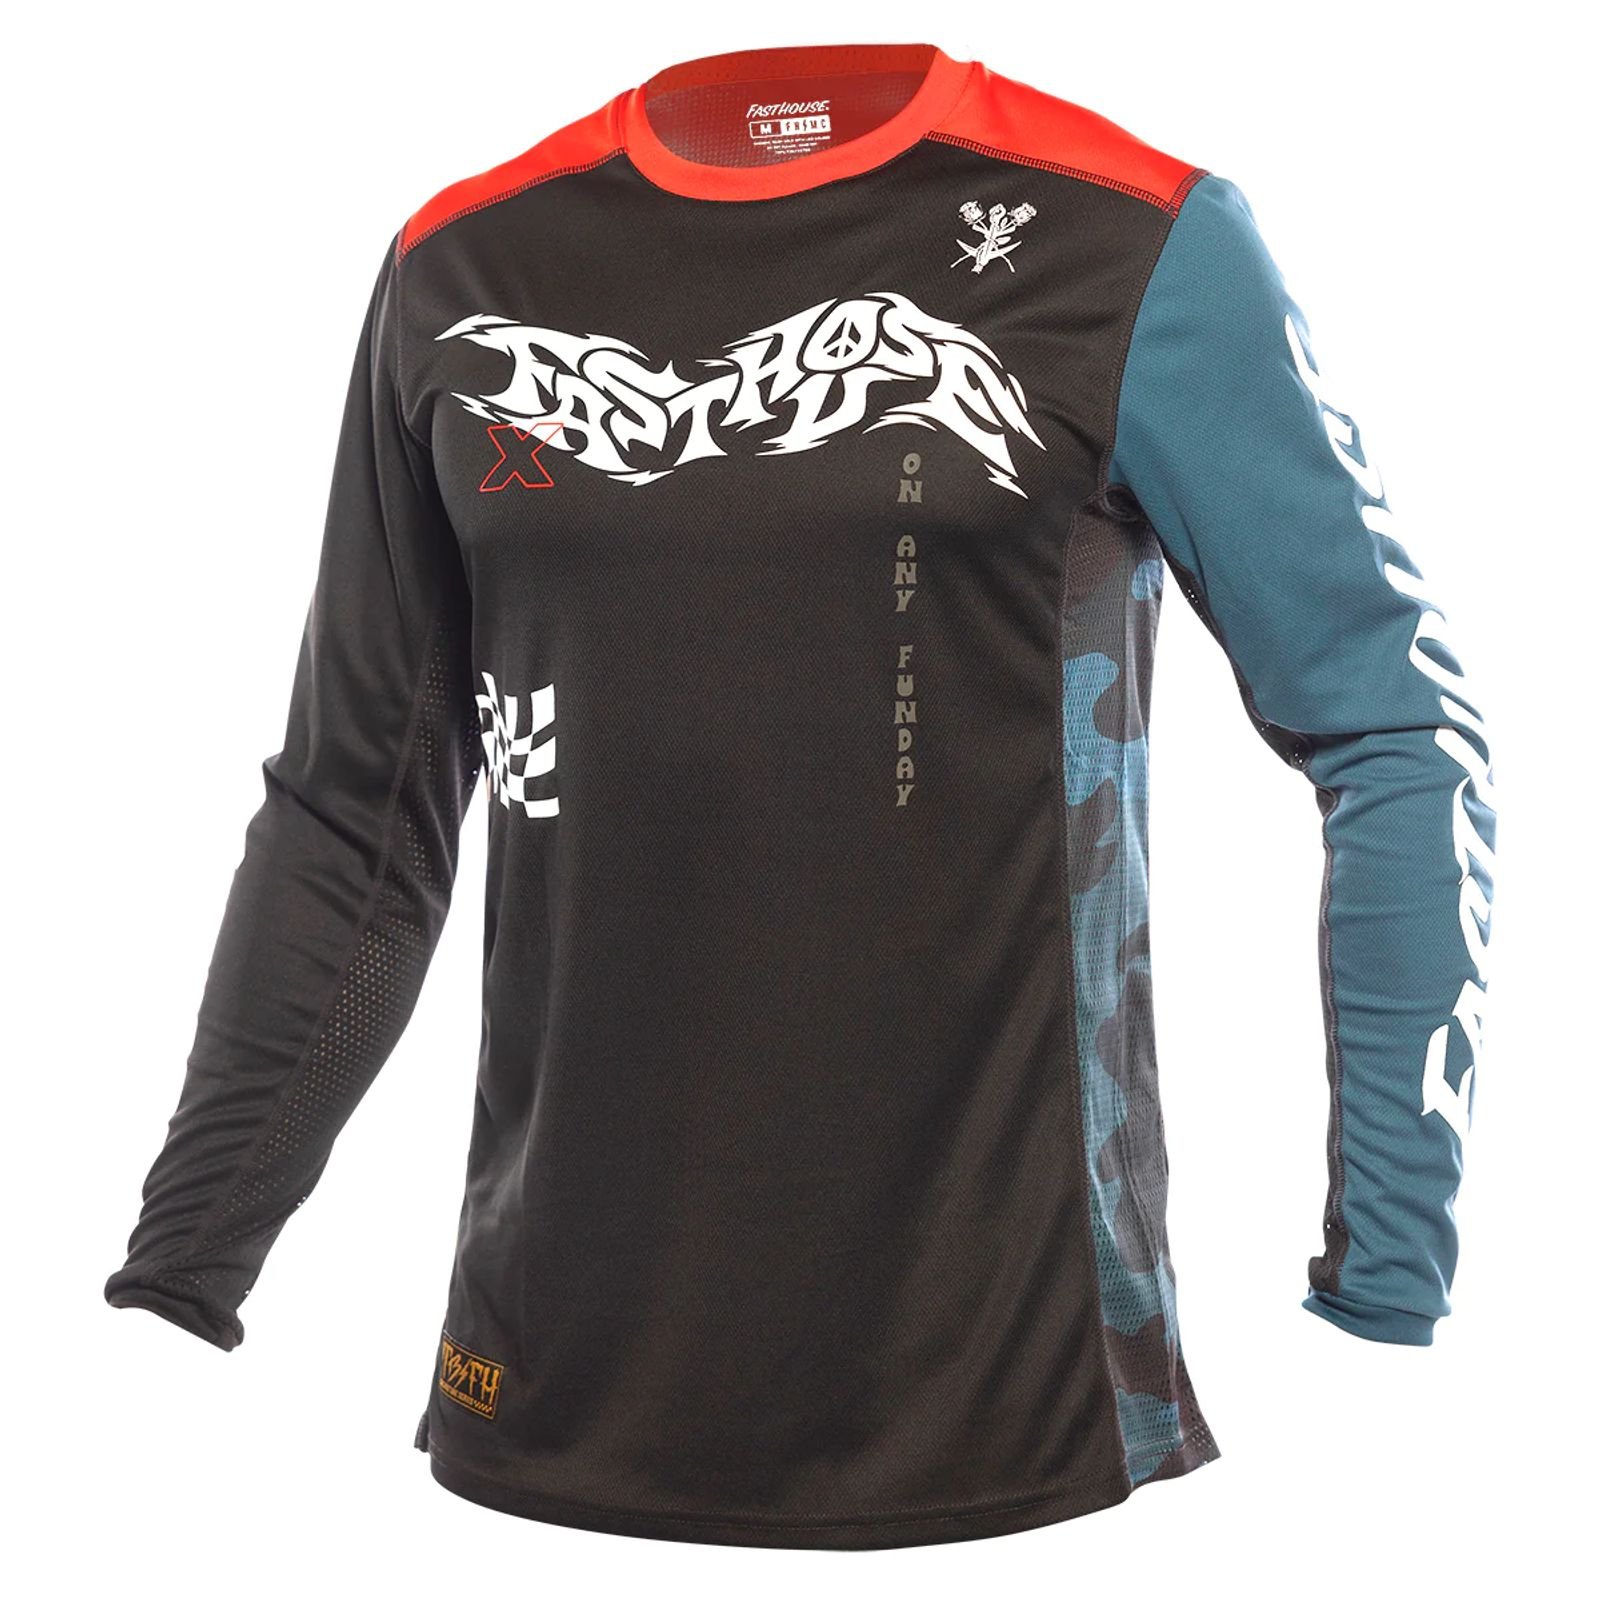 FastHouse Grindhouse Bereman Jersey (Black/Infrared)